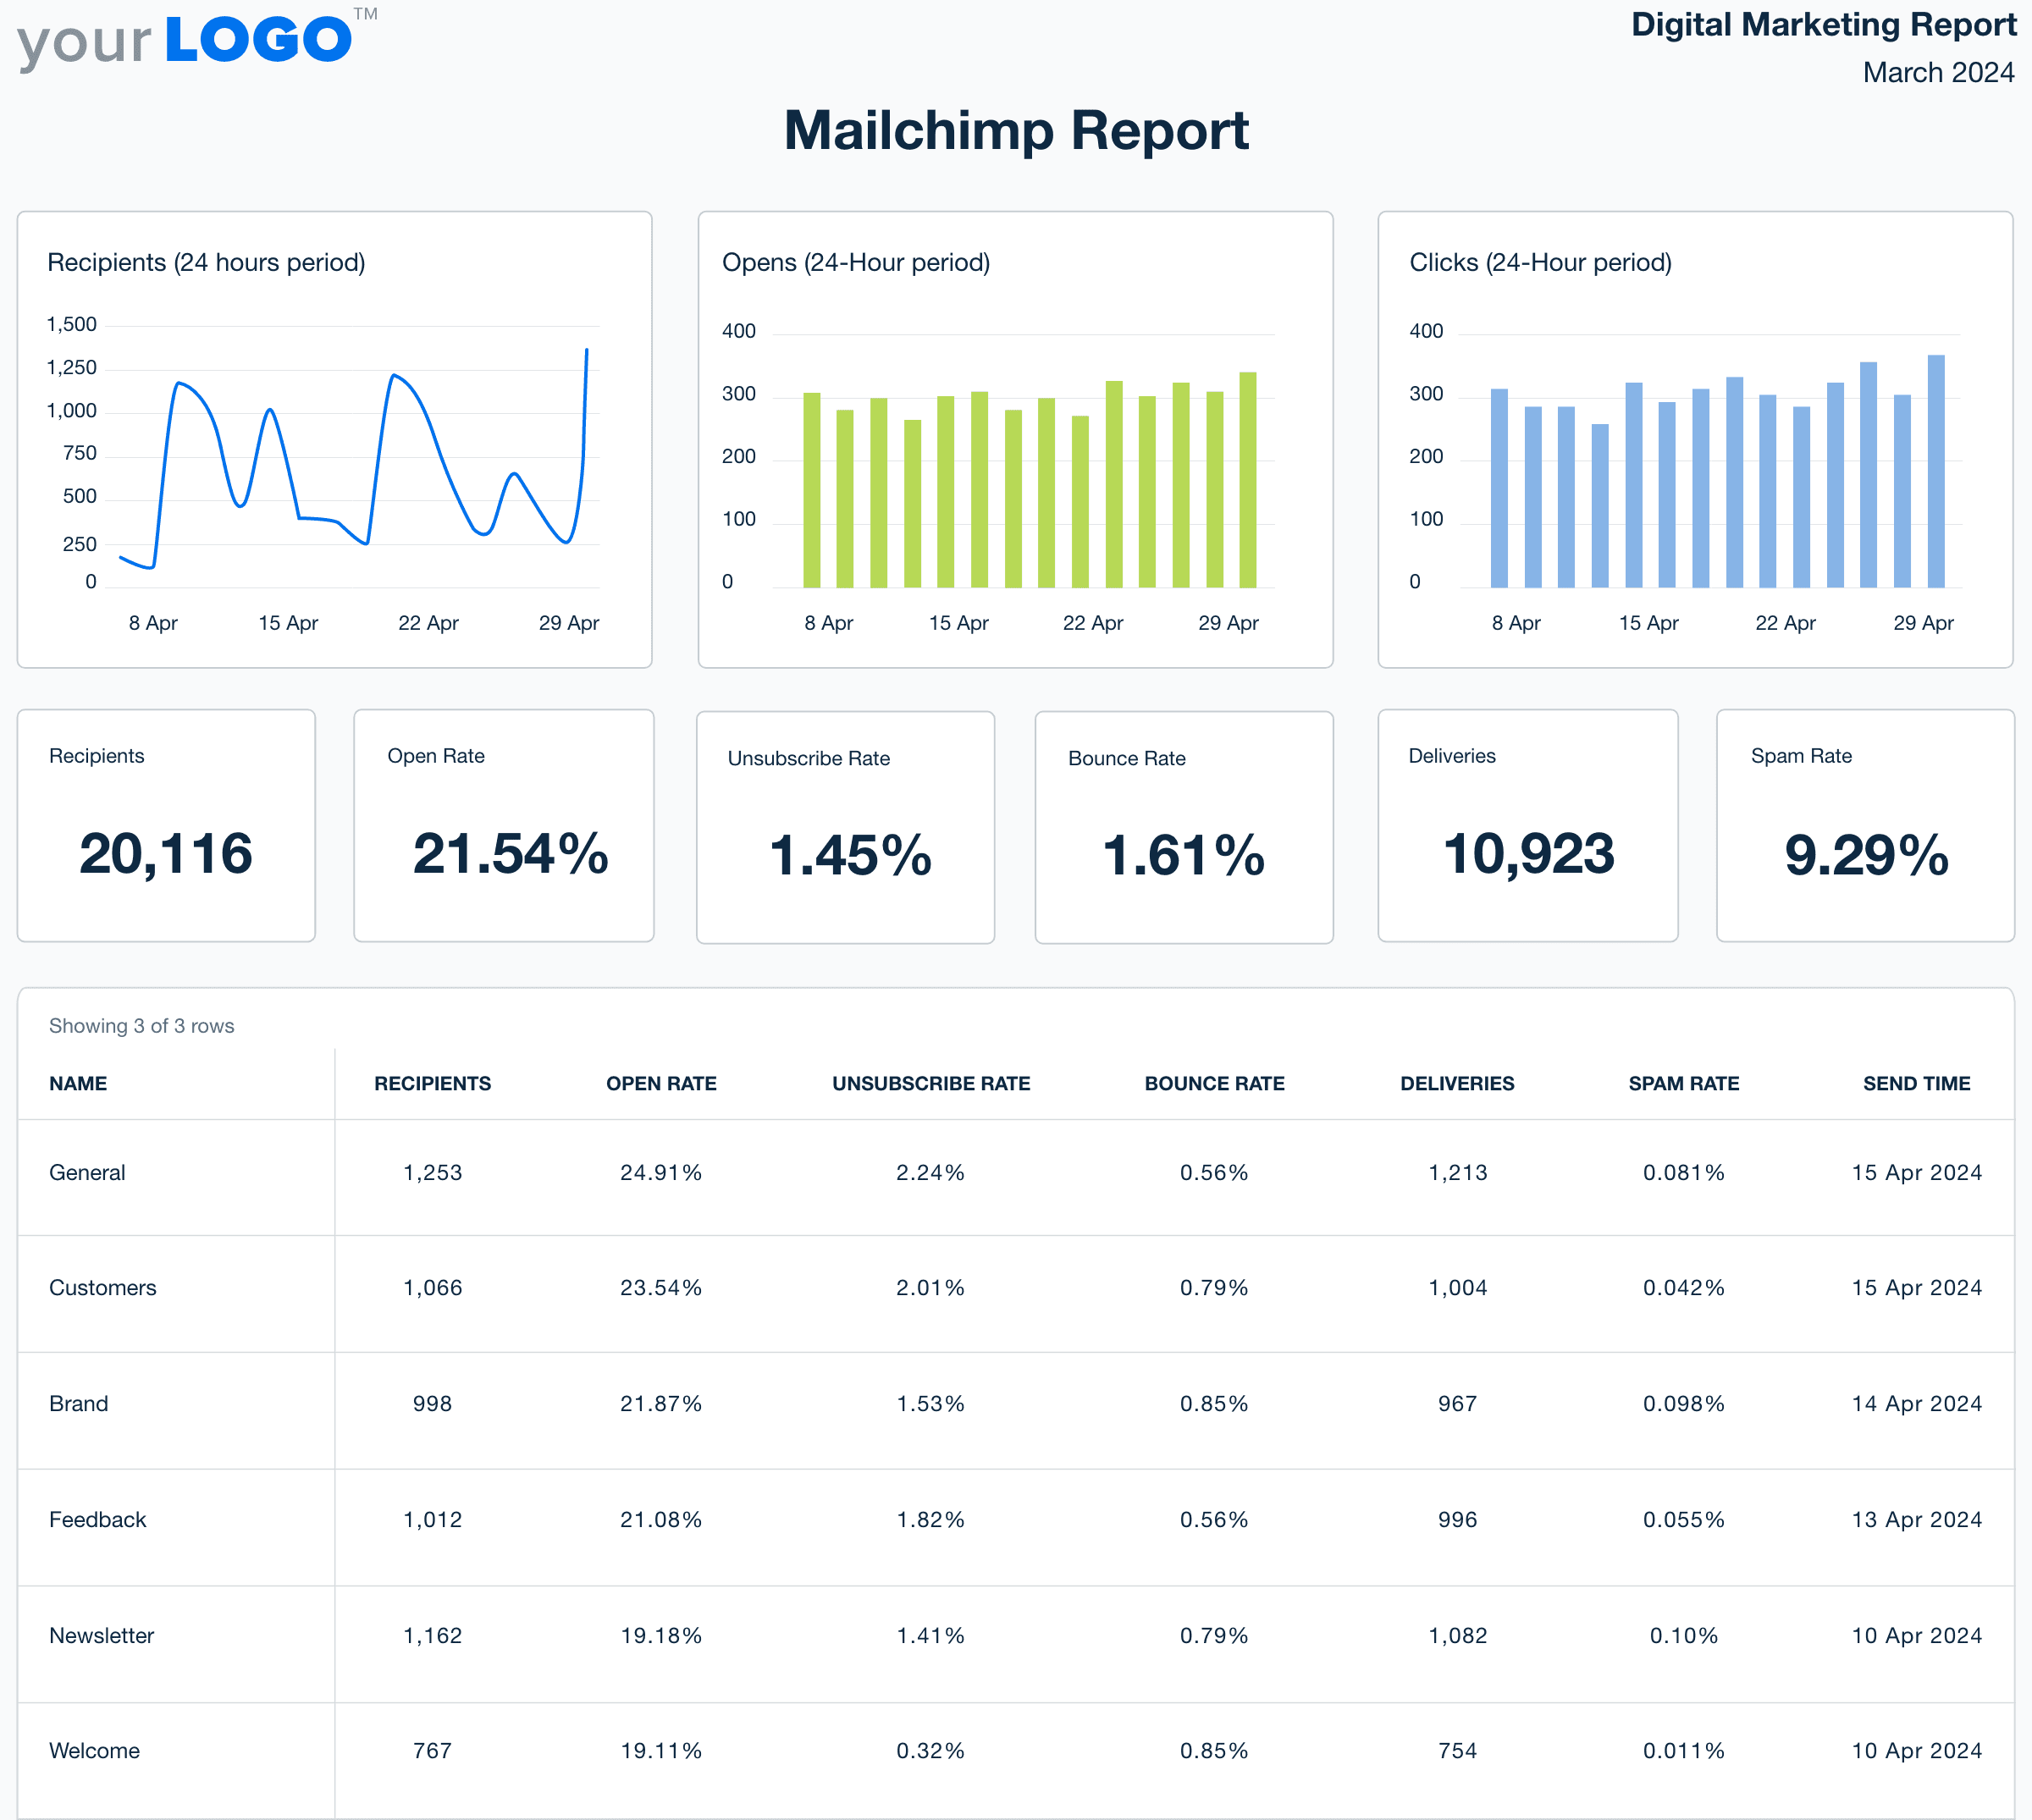 Mailchimp Report Template Example

